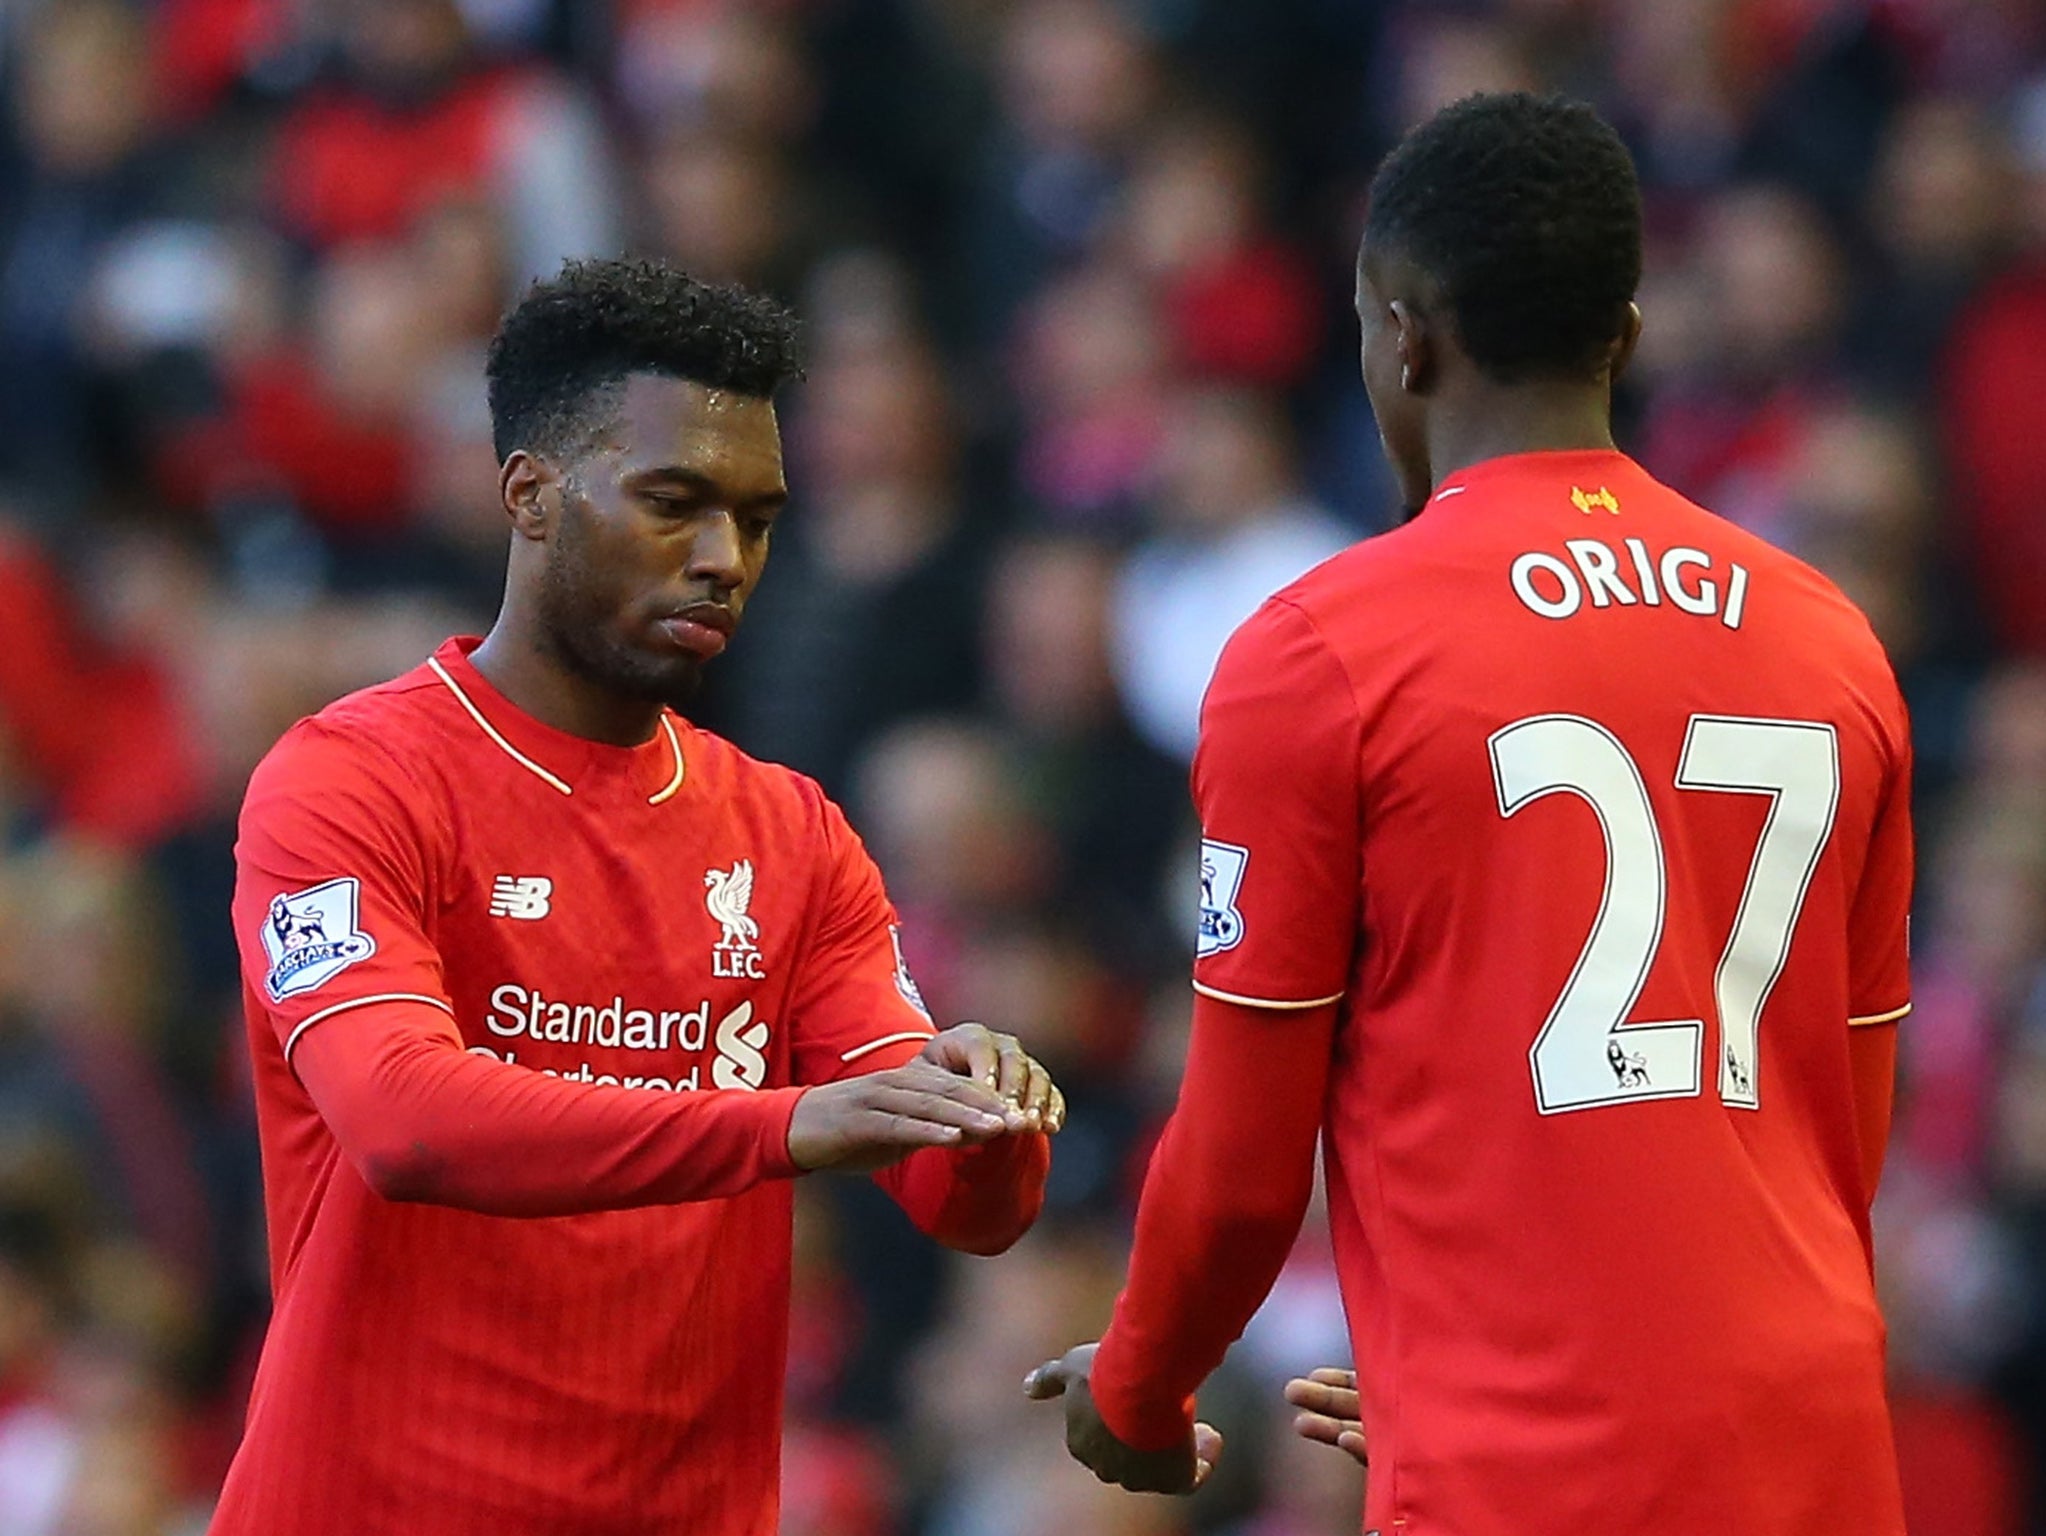 Daniel Sturridge is replaced by Divock Origi in the draw with Tottenham earlier this month